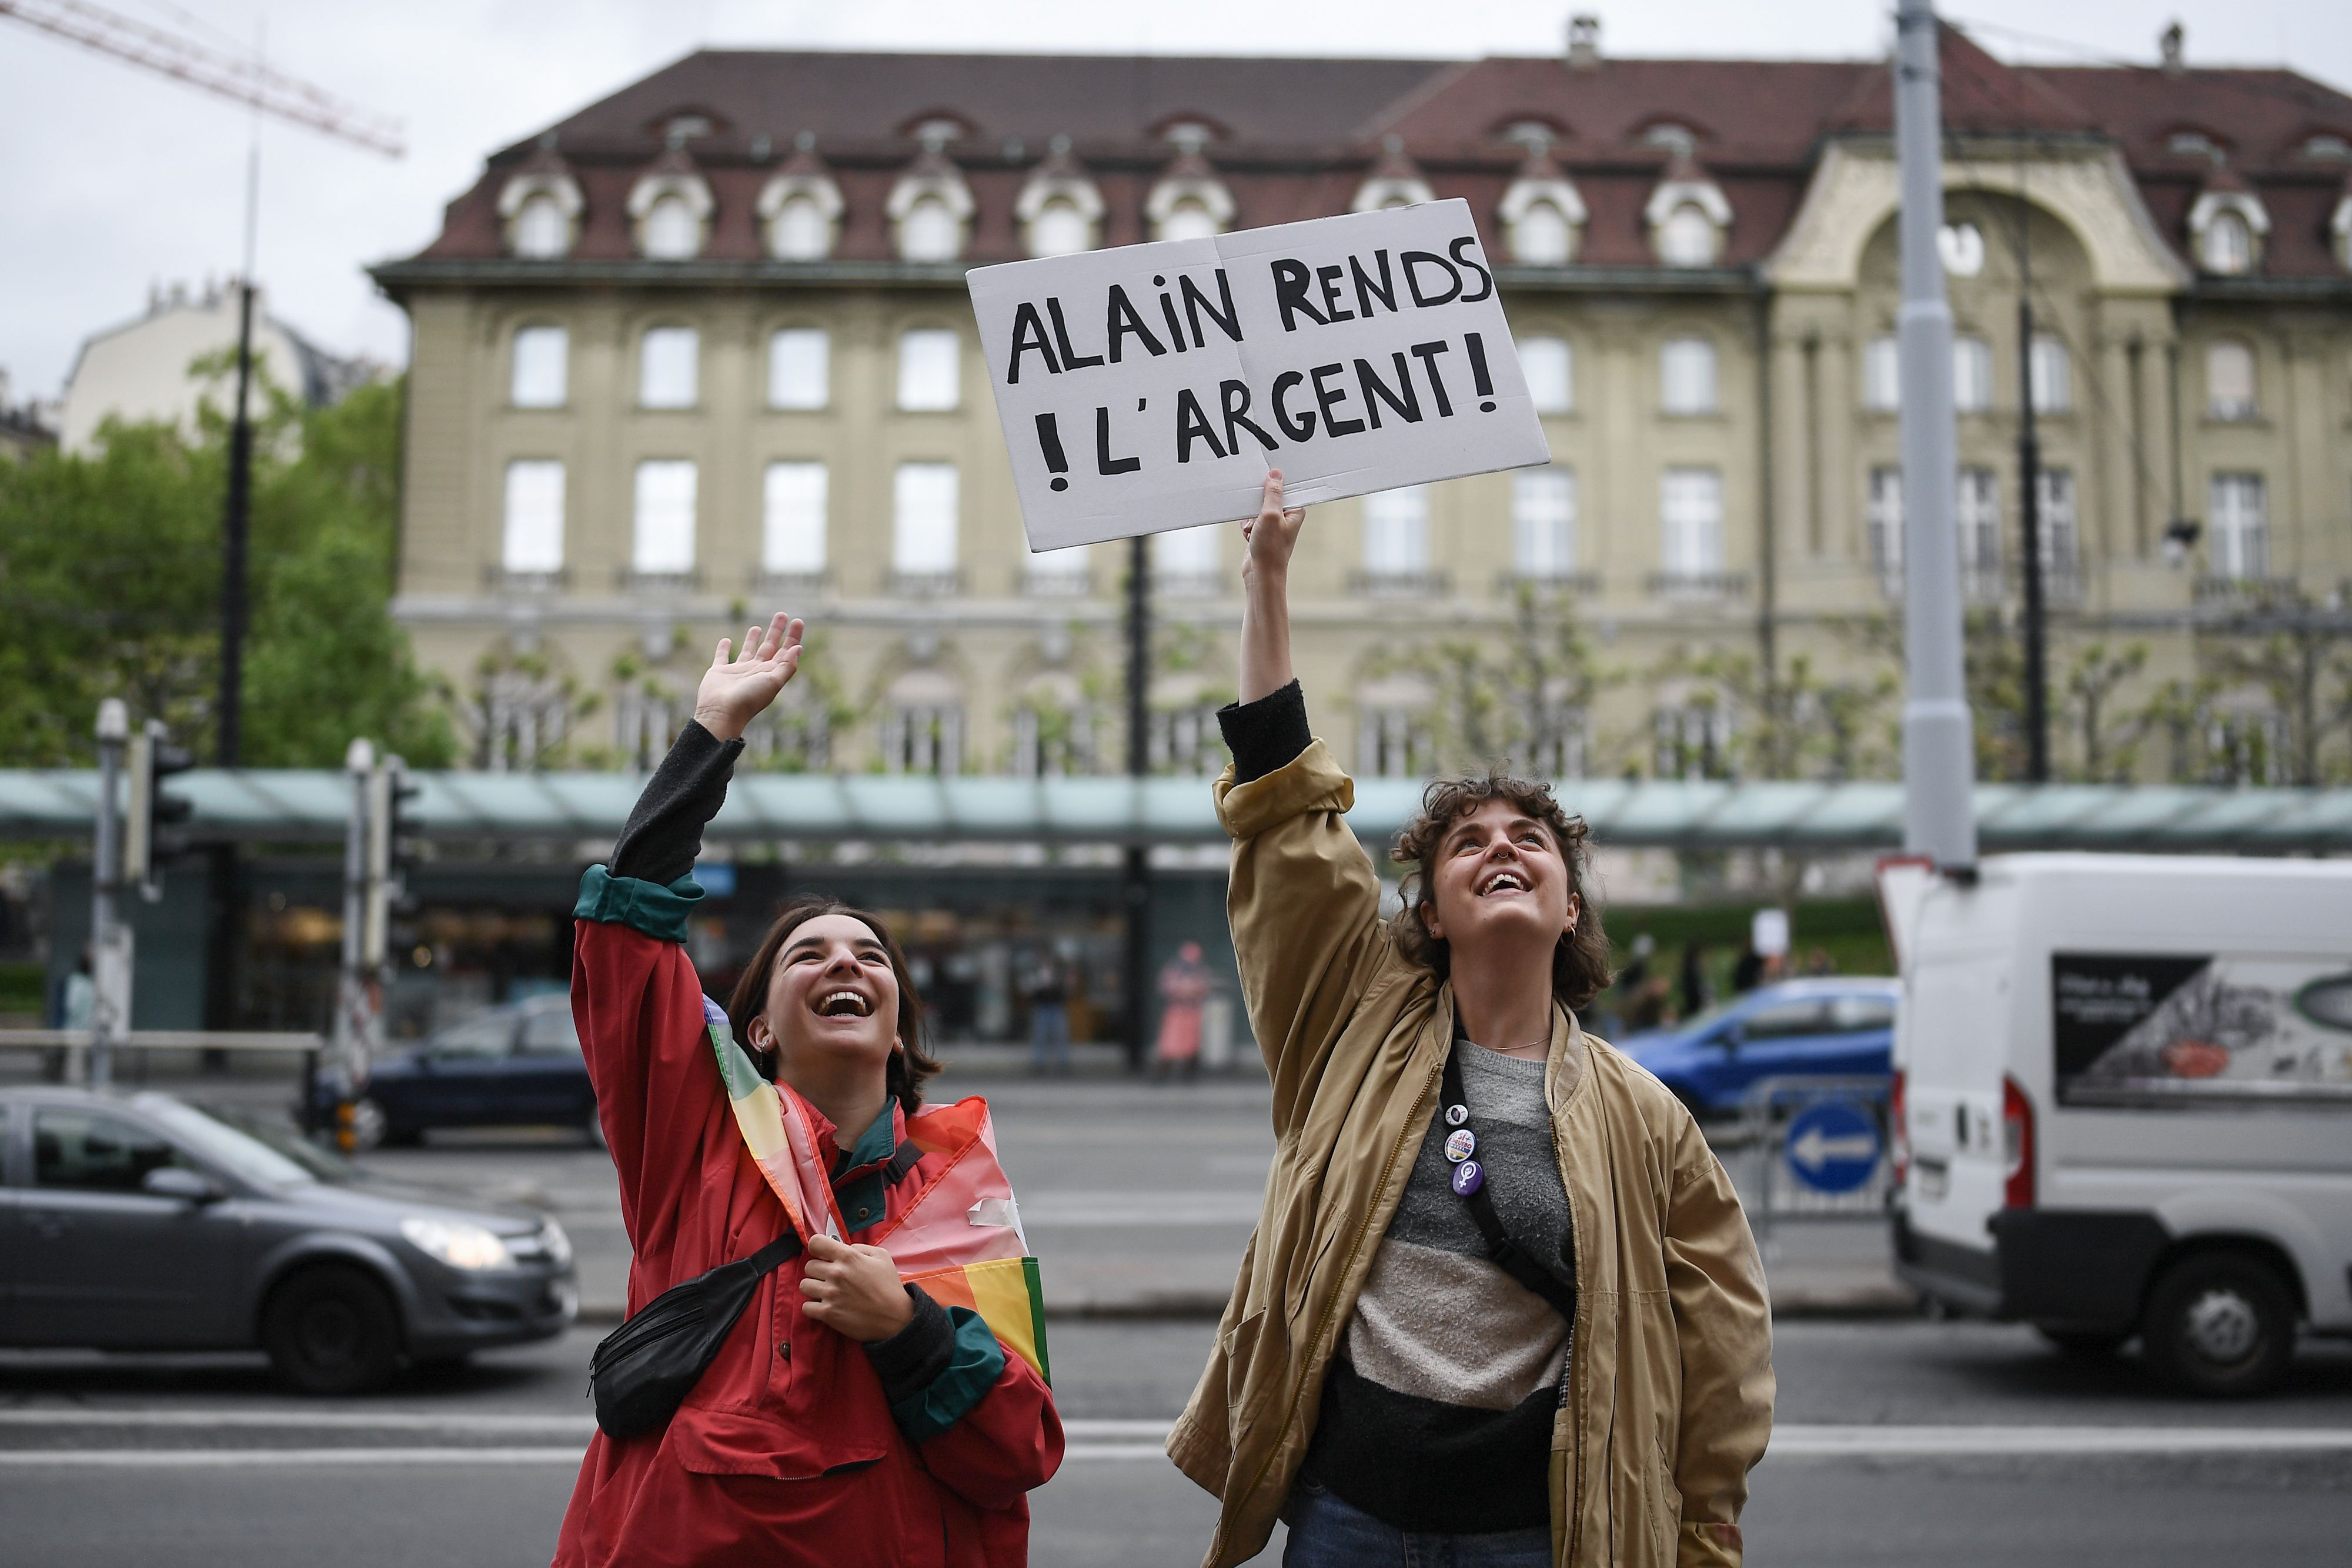 In this image, two women stand outside, one holding a sign that reads" Alain Rends L'argent!" 